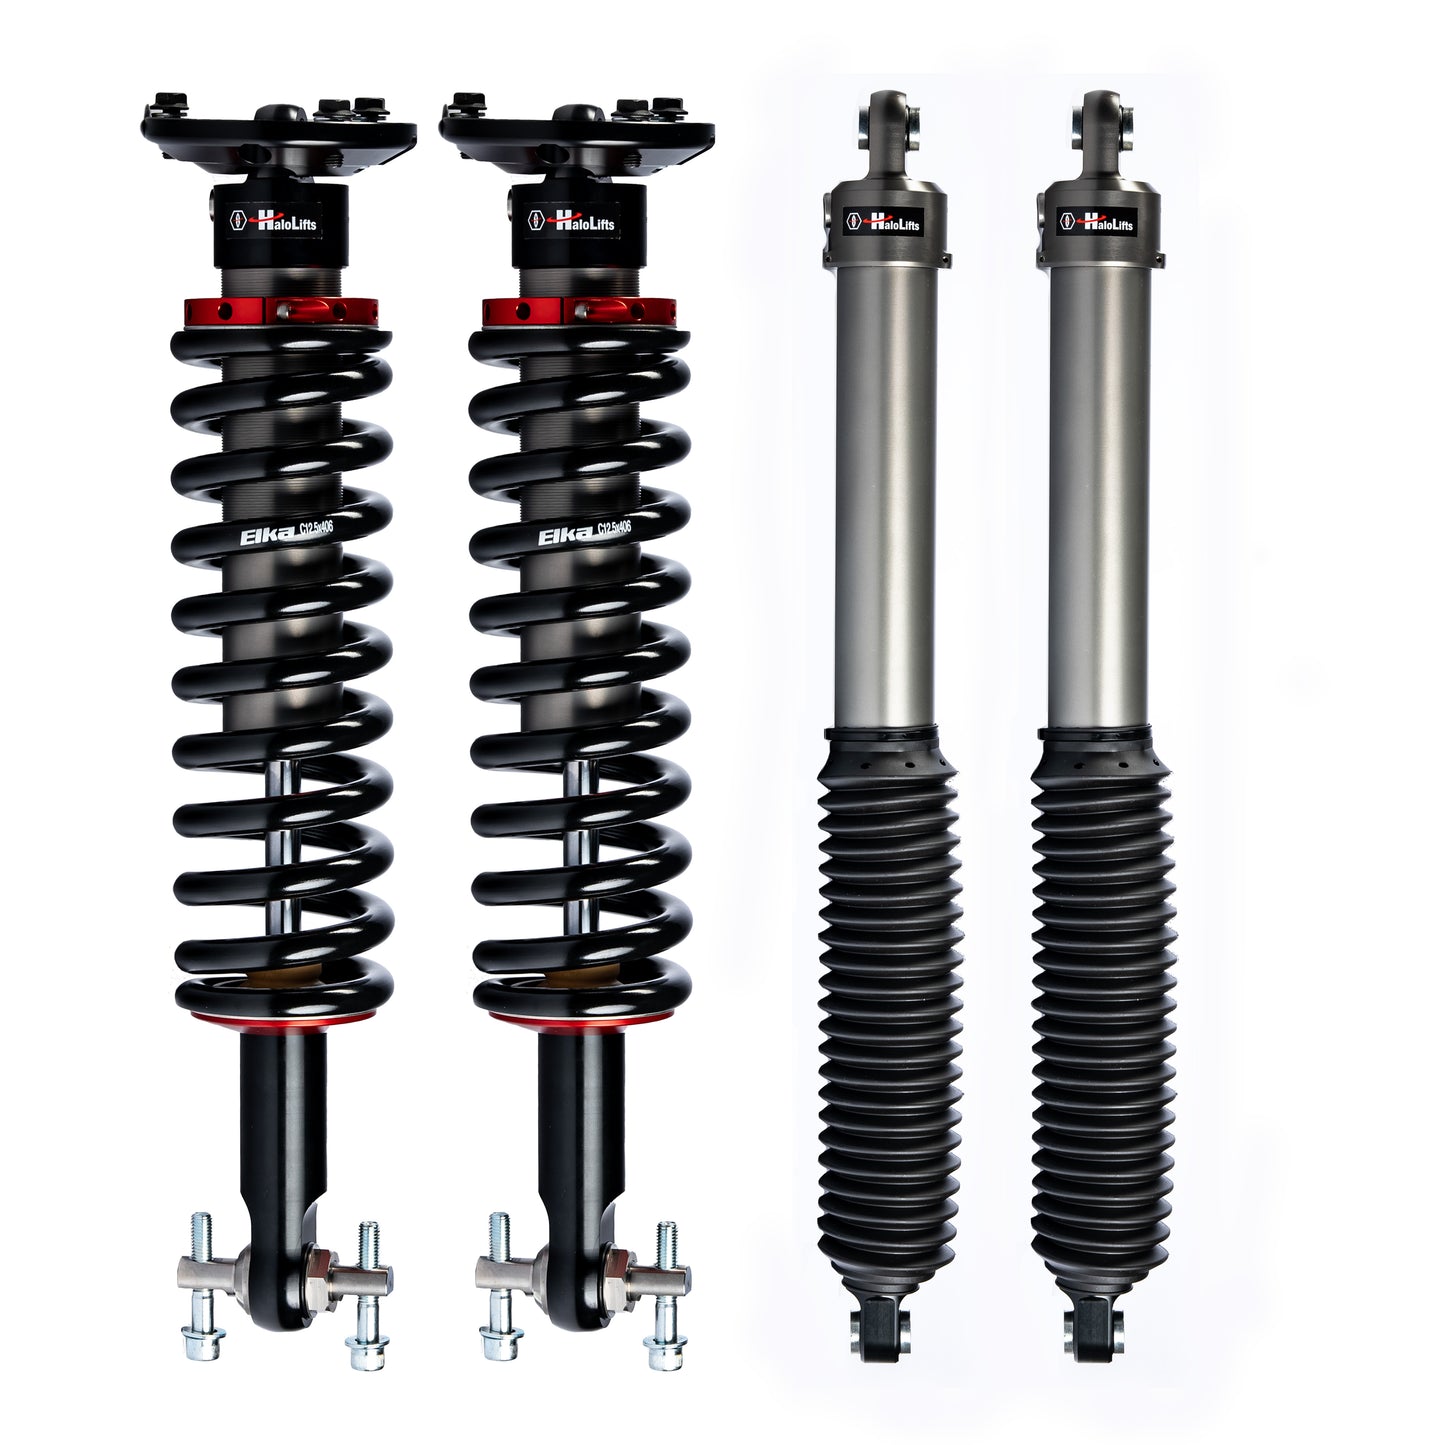 HaloLifts/Elka 2.5 IFP FRONT & REAR SHOCKS KIT for FORD F-150 4x4, 2014 to Current